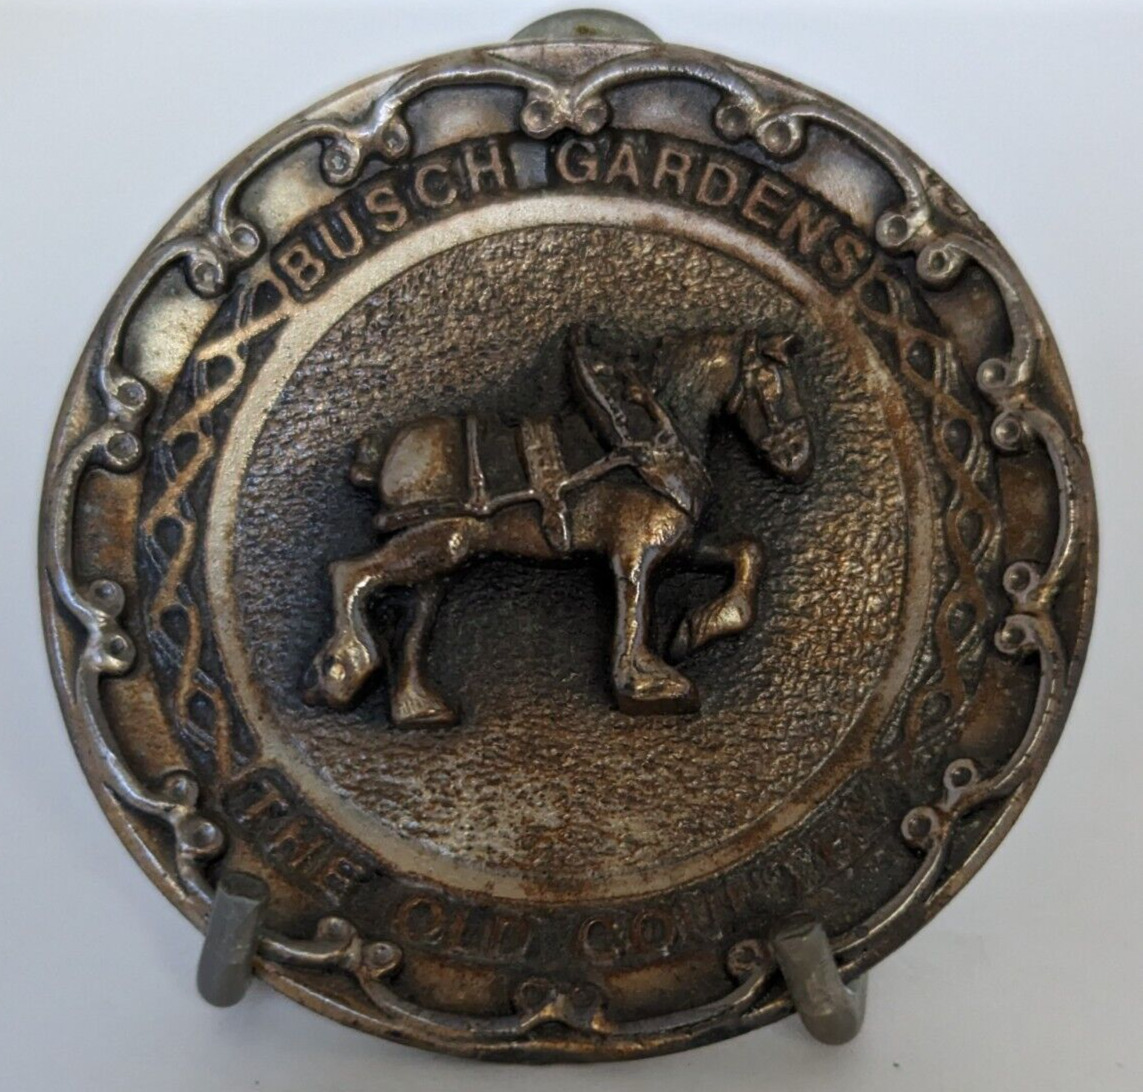 Vintage Colonial Pewter Mini Plate Busch Gardens The Old Country Souvenir  STAND